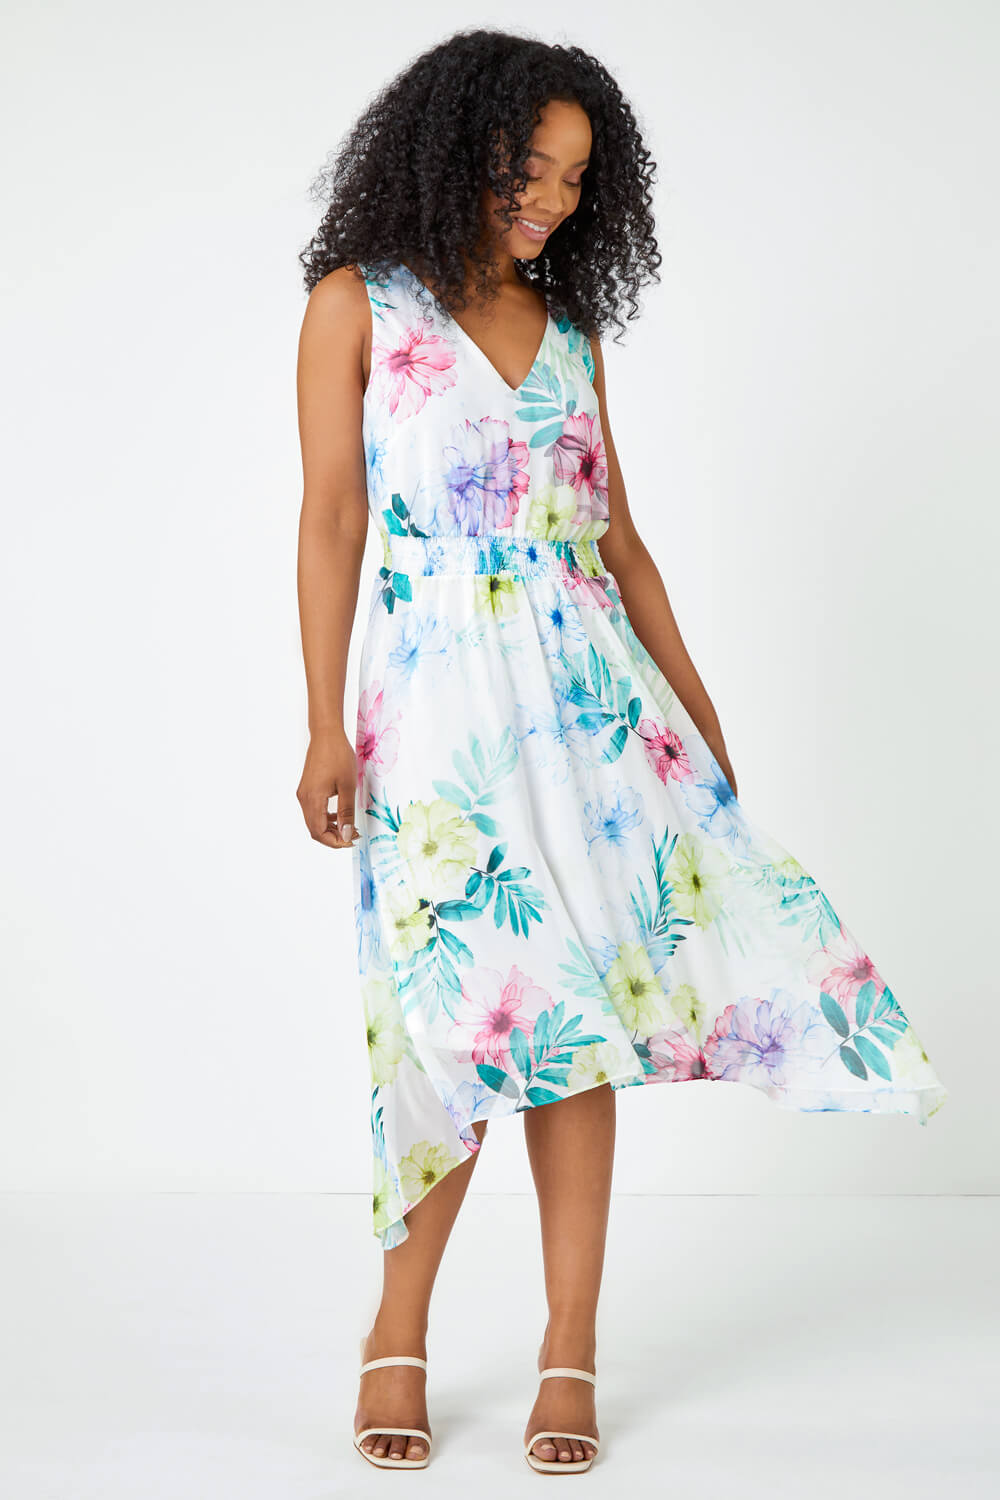 White Petite Floral Print Shirred Dress, Image 2 of 5